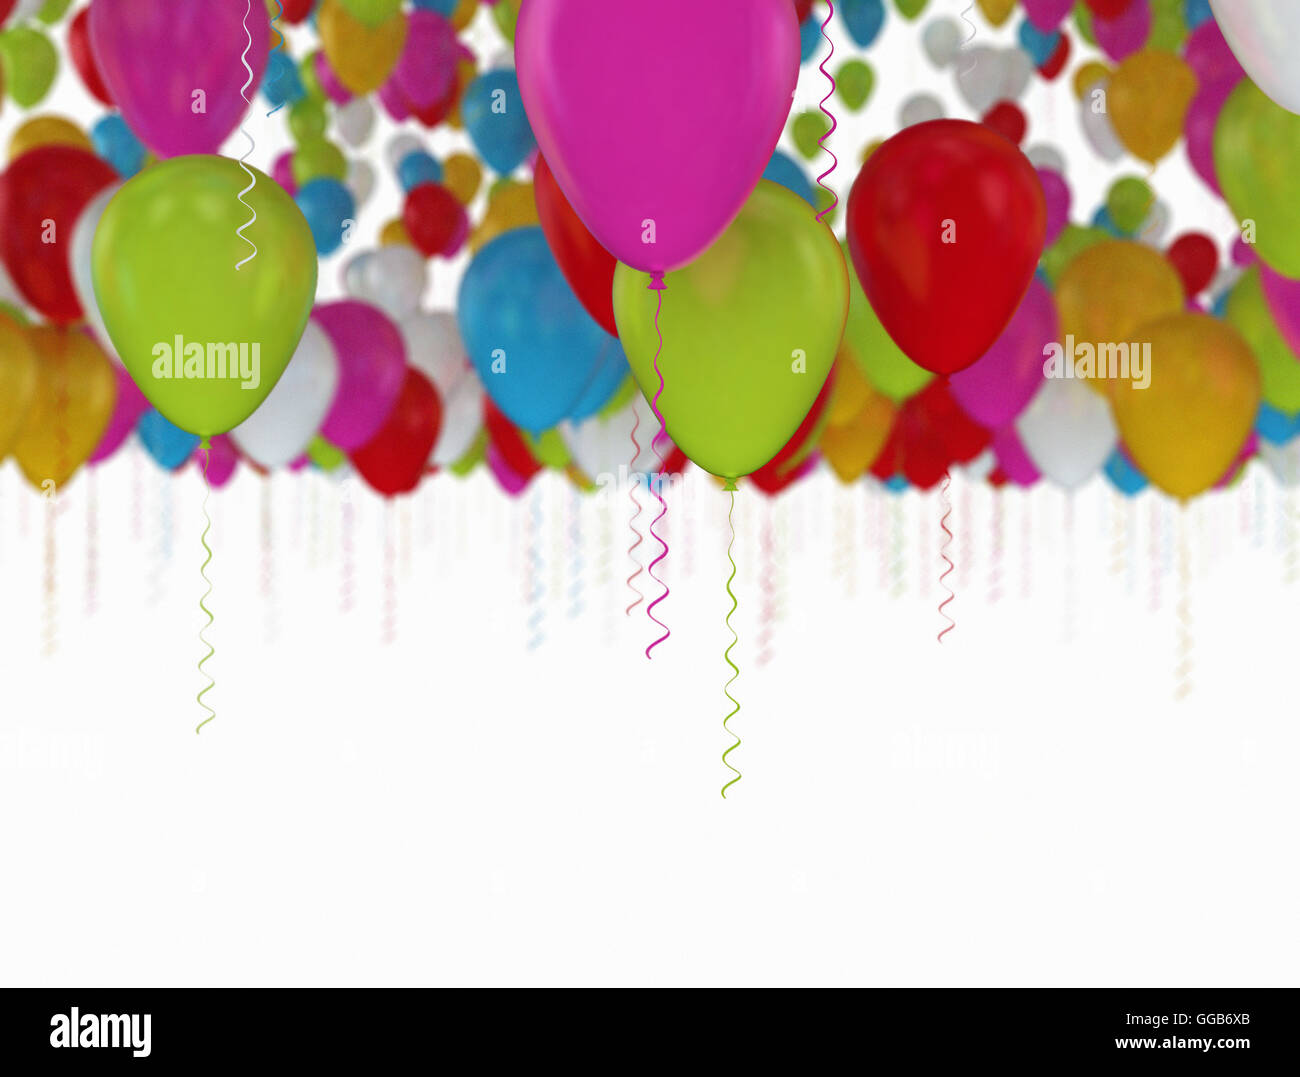 Many Colors Balloons on white background Stock Photo